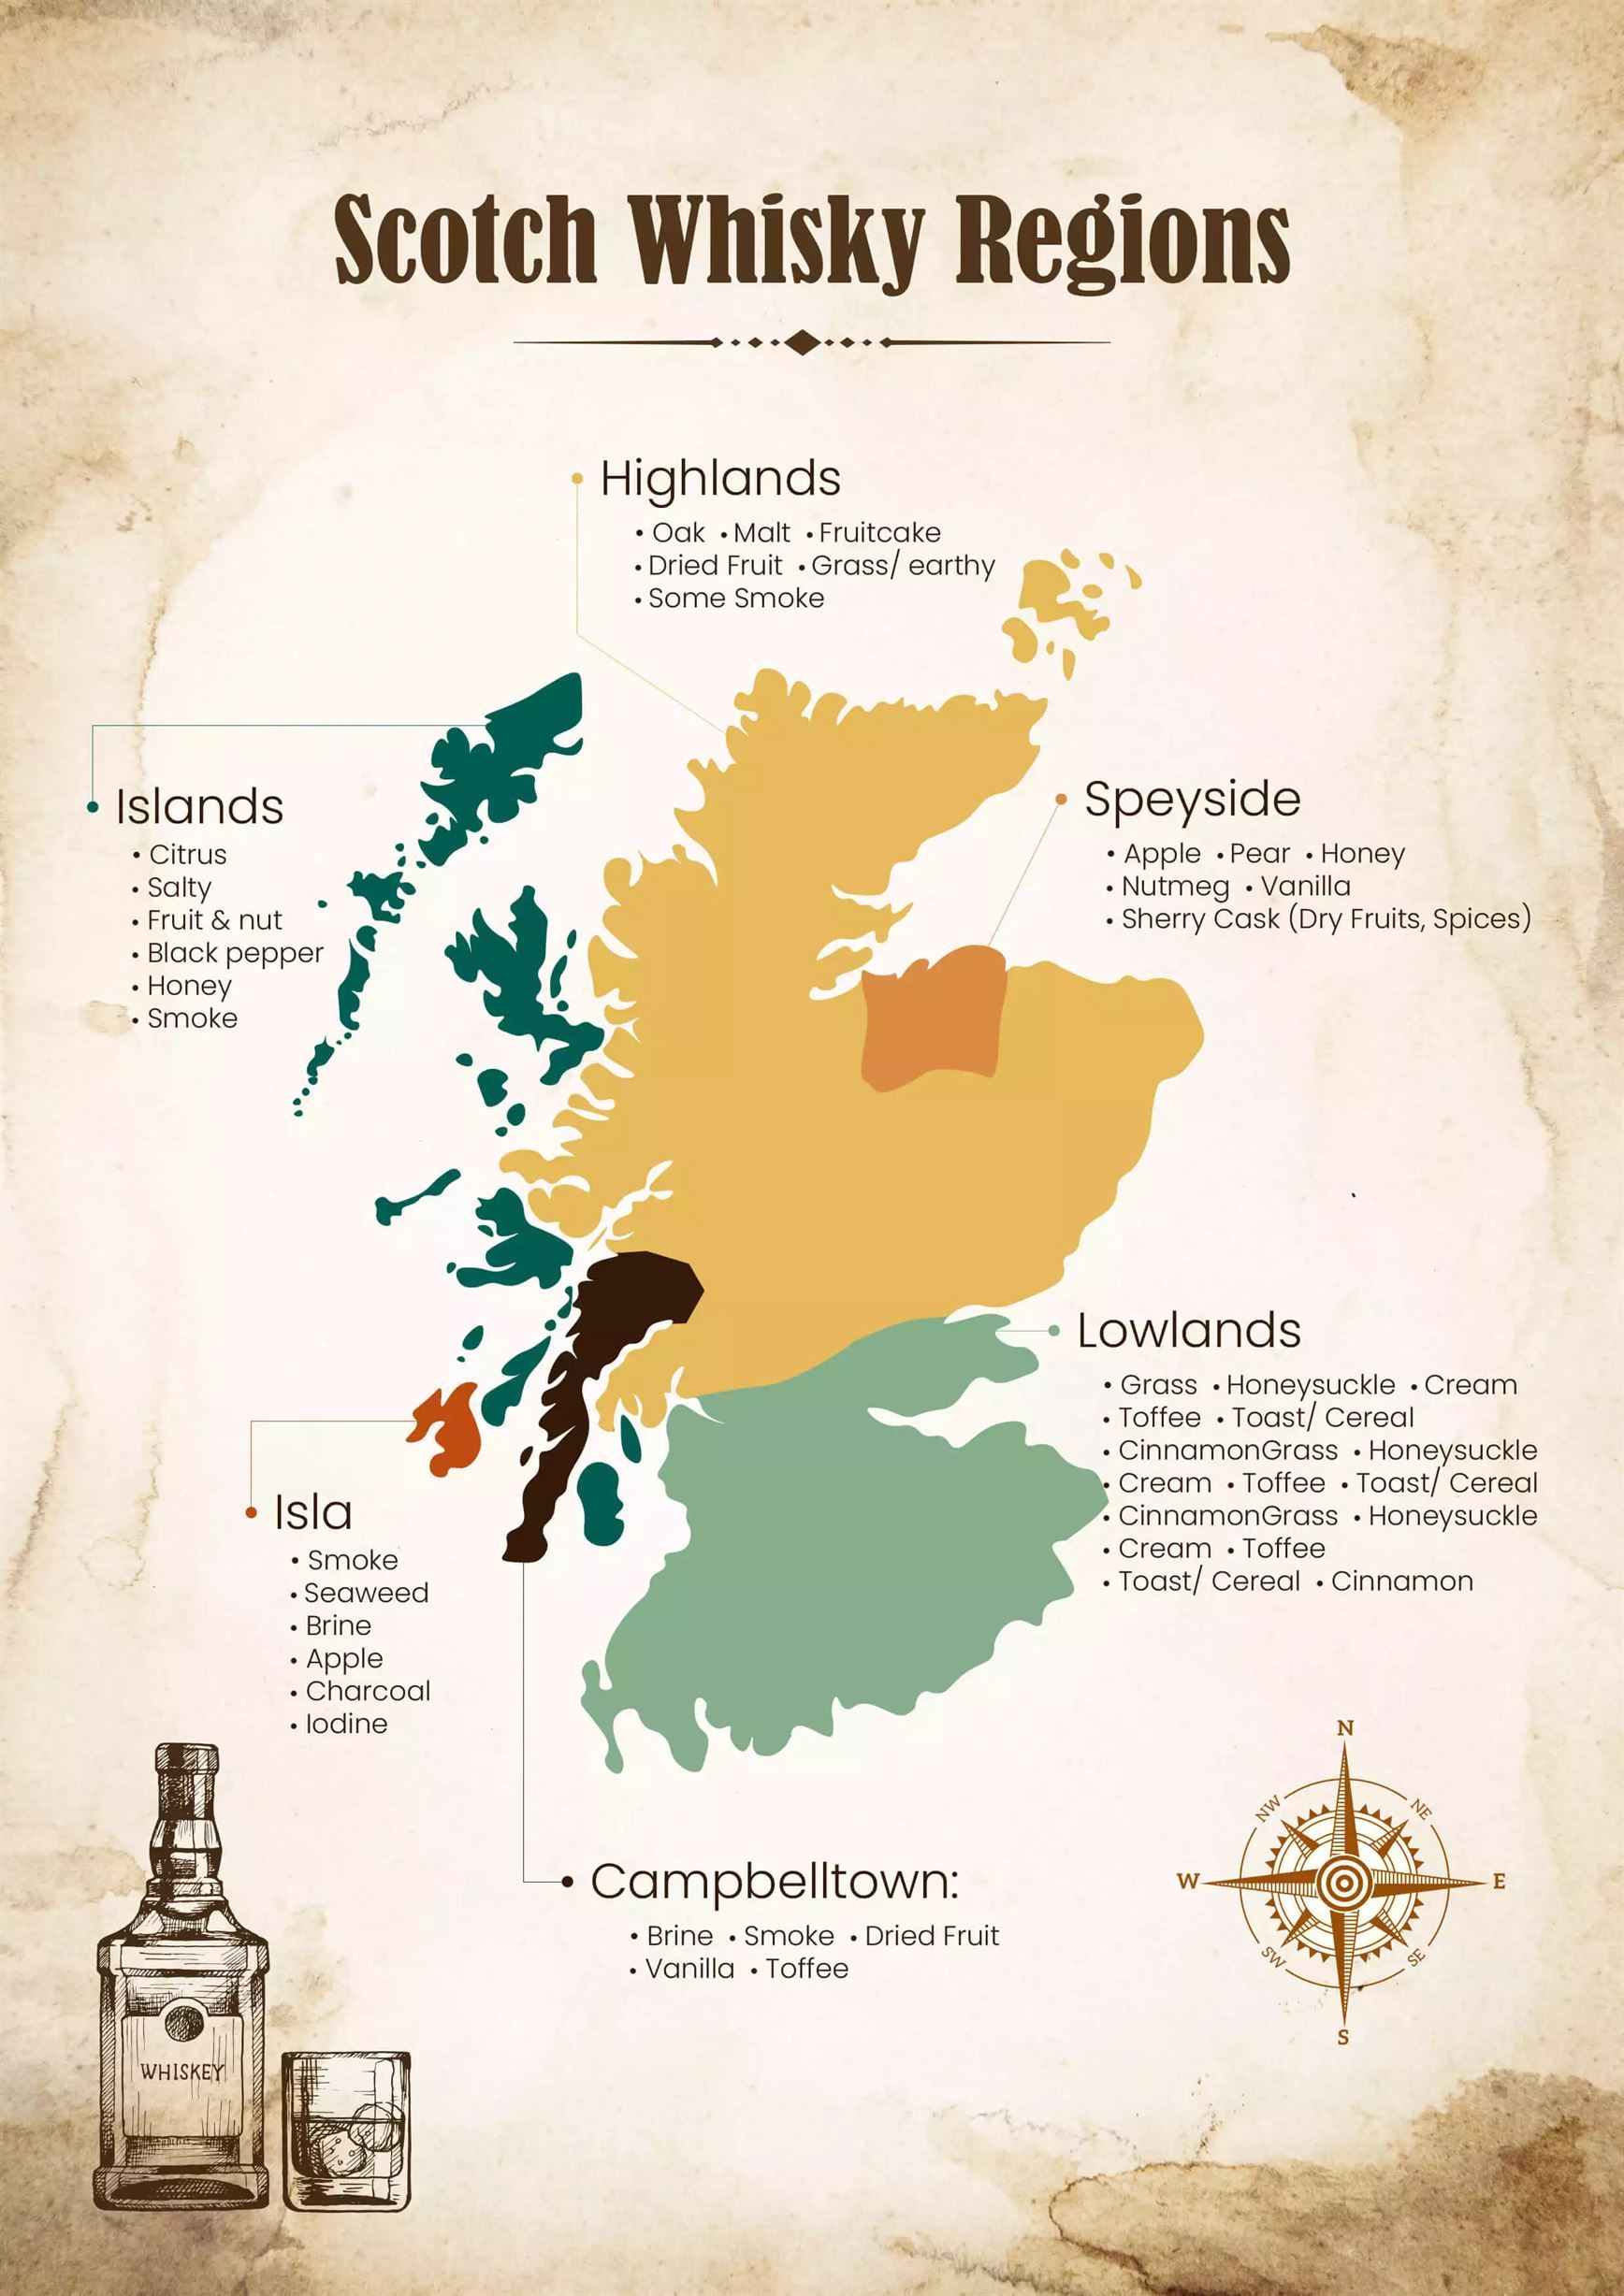 Scotch Whisky Regions Types & Characteristics of Whisky in Scotland